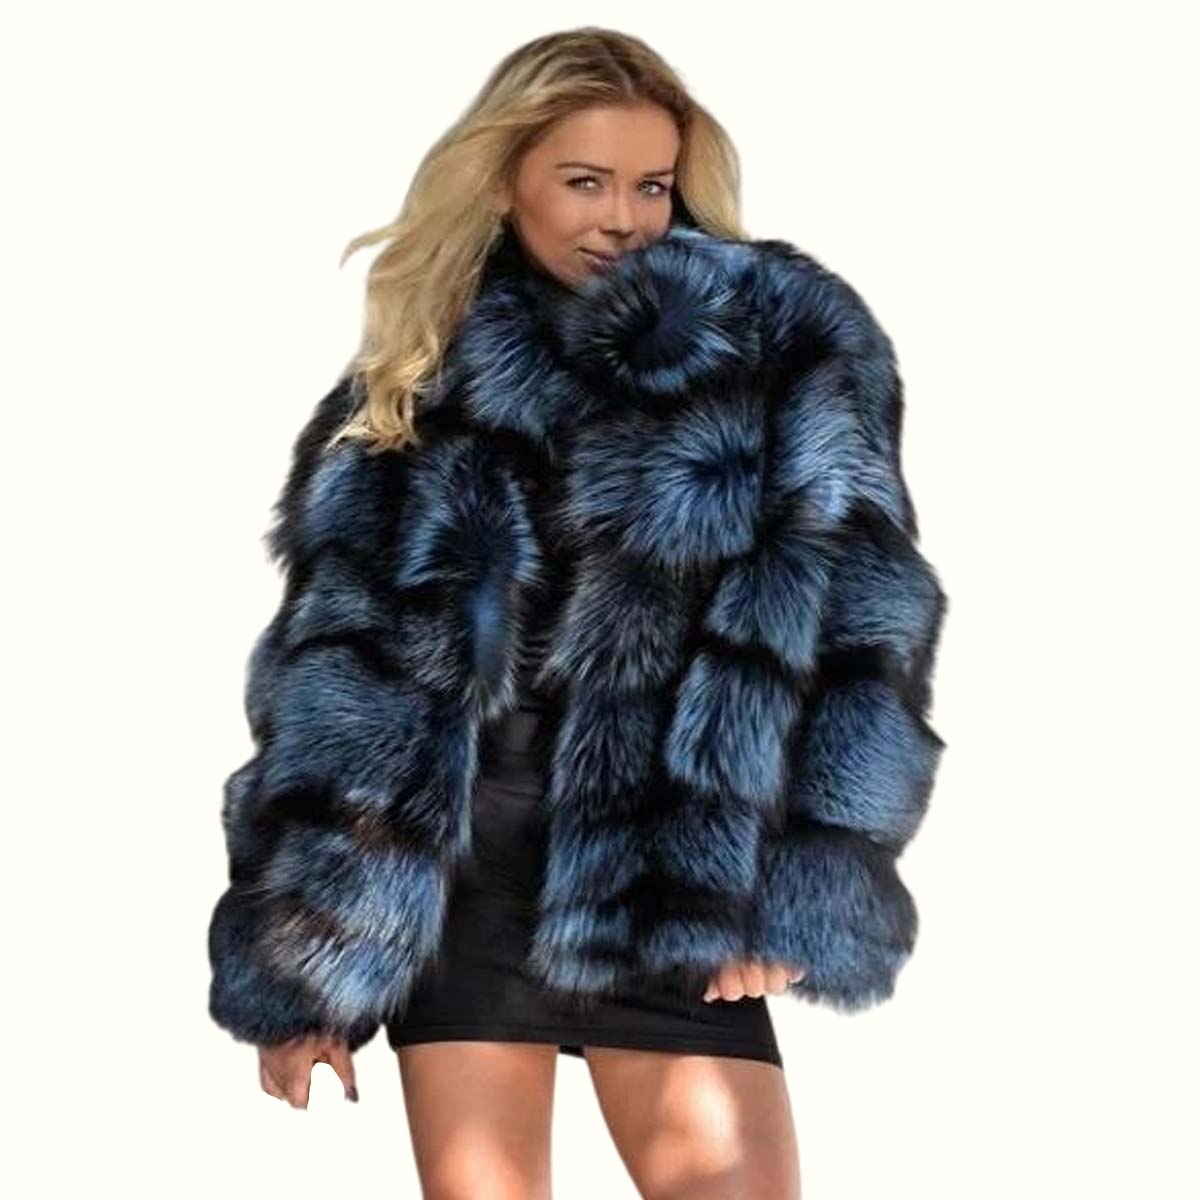 Blue Fox Fur Coat viewed from front